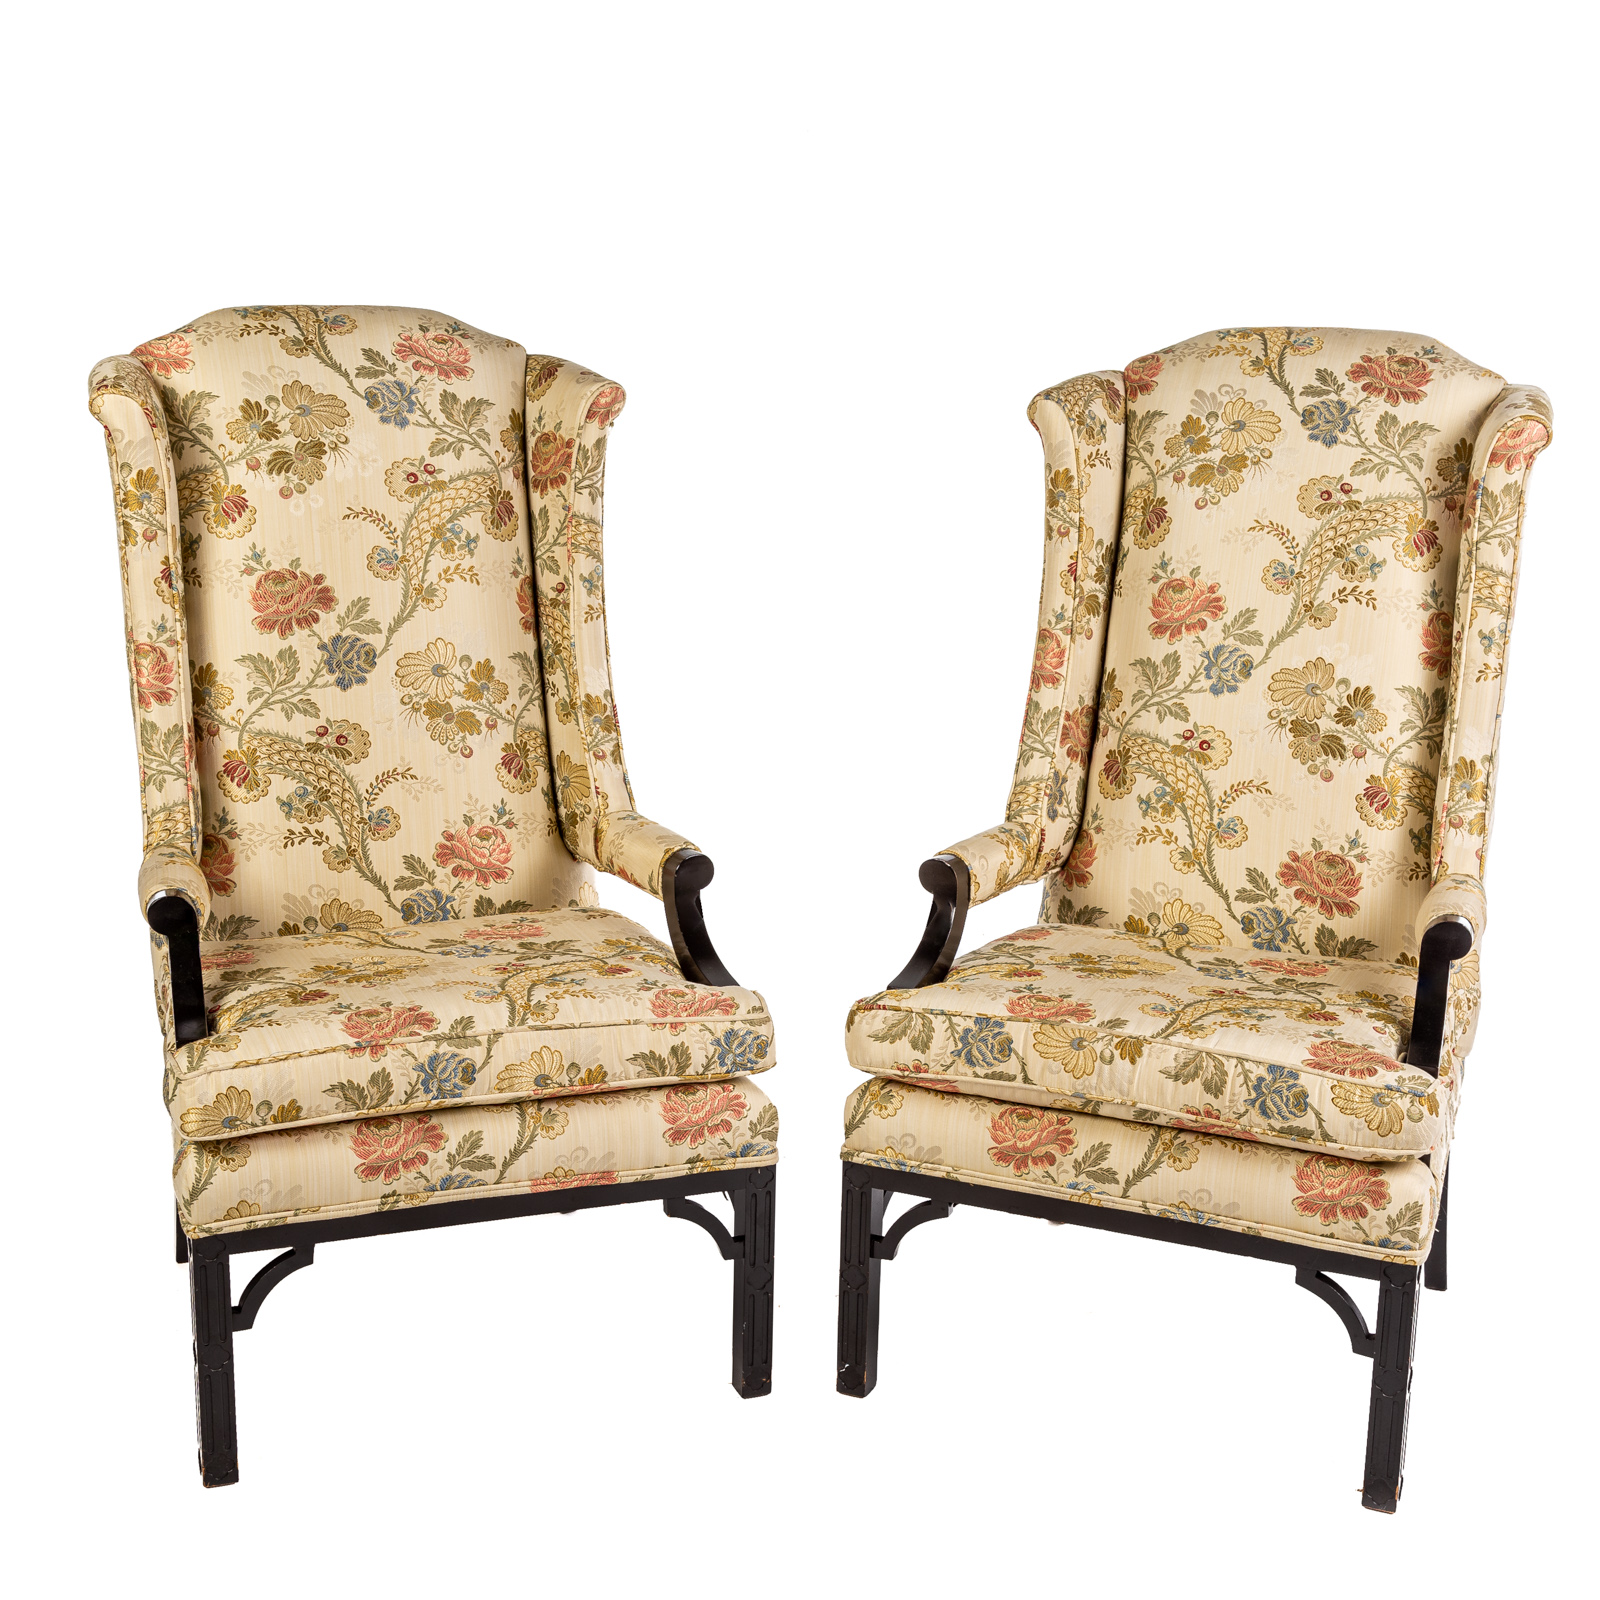 A PAIR OF CHINESE CHIPPENDALE STYLE 29ddb9